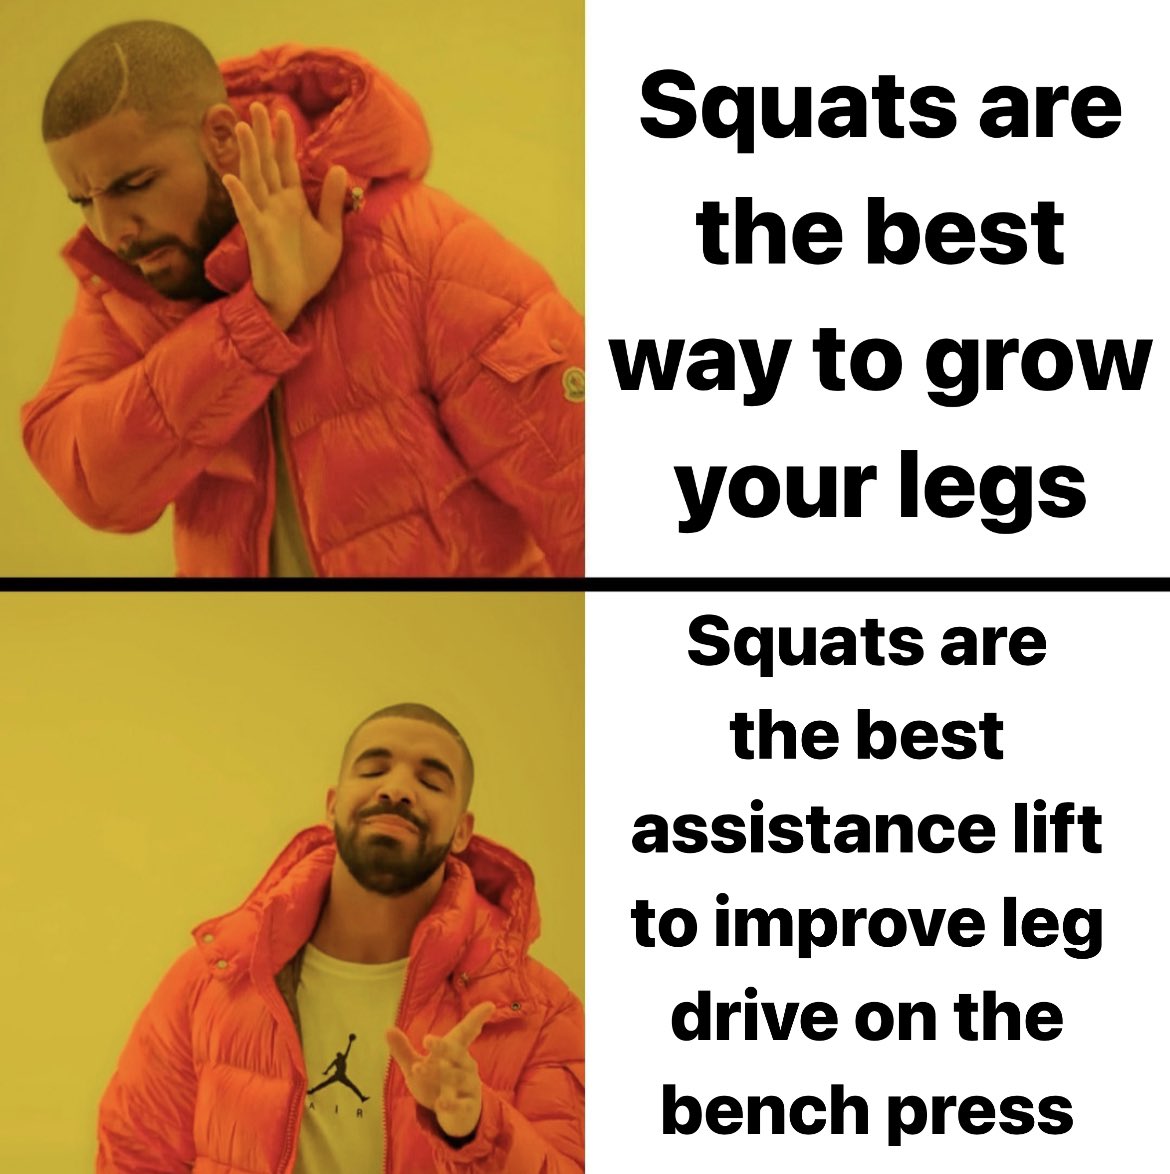 Follow me for more bench press tips